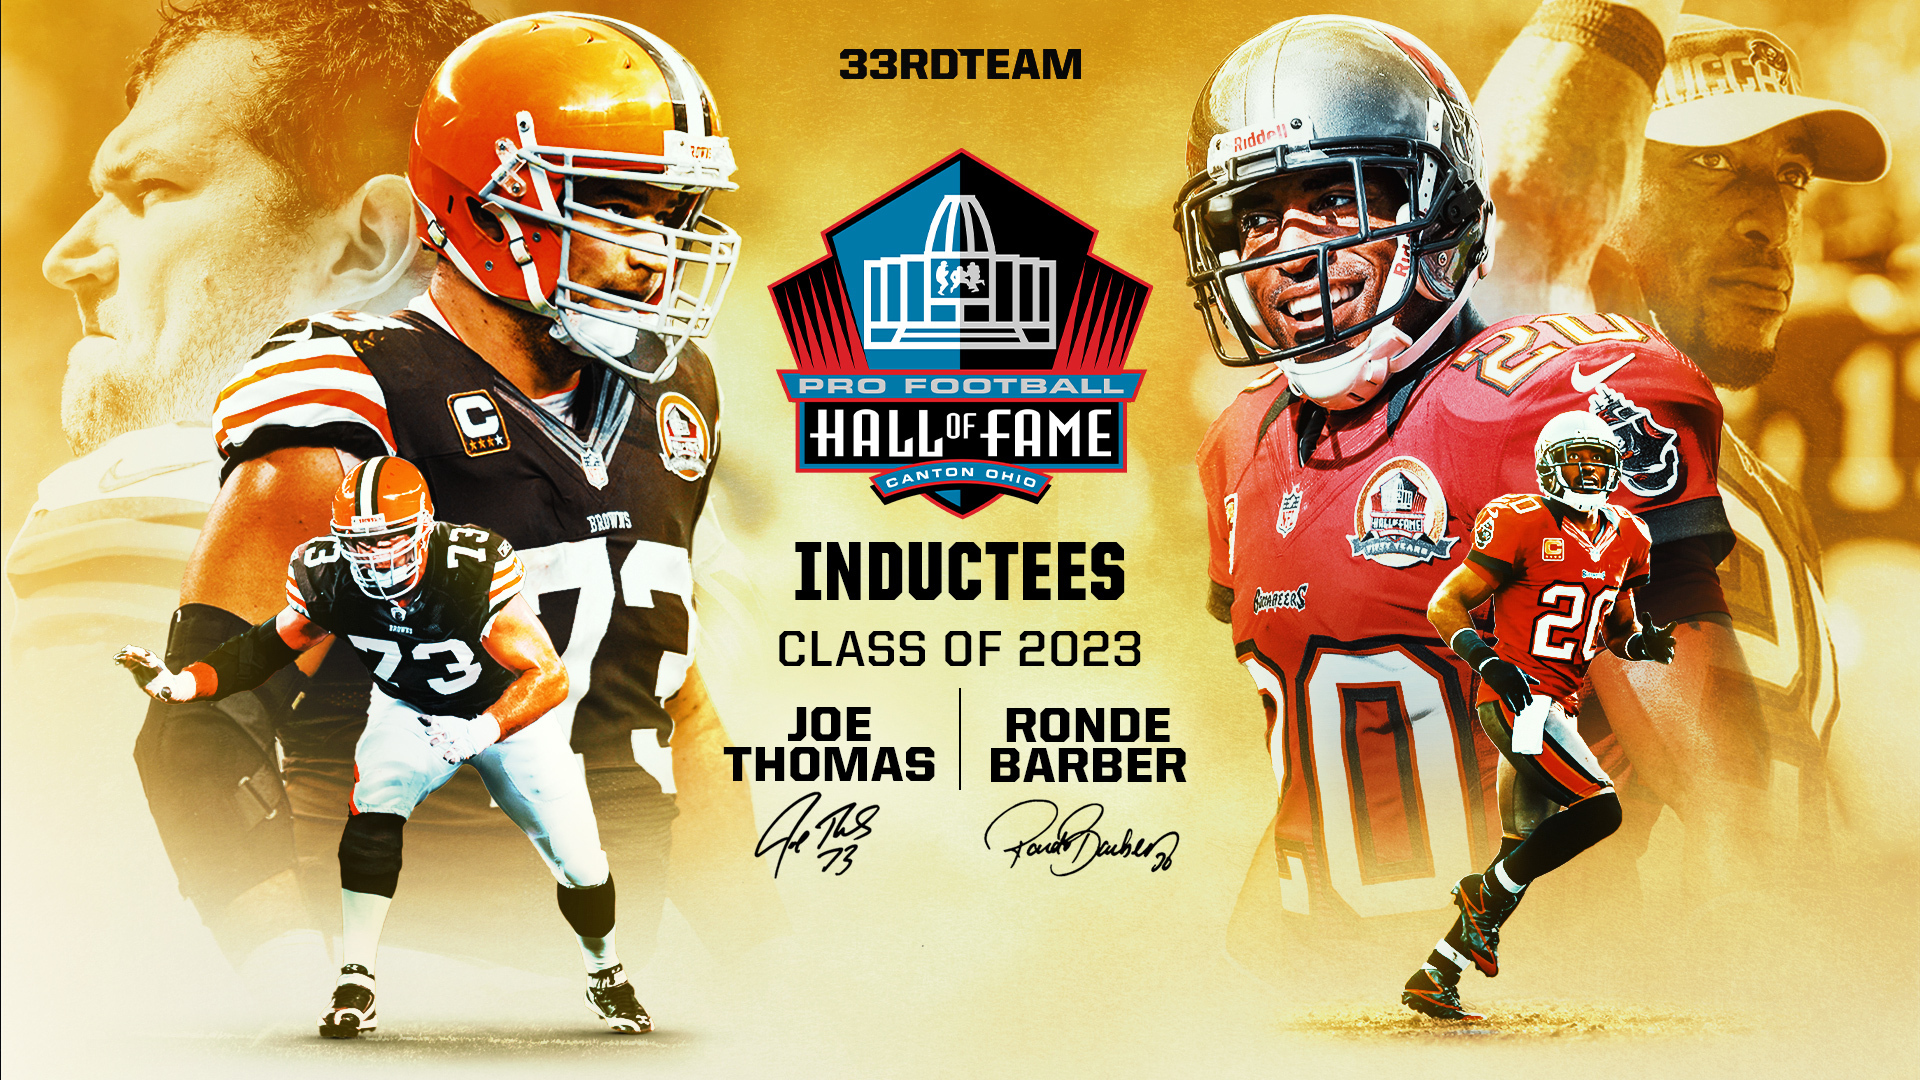 Hall of Fame The 33rd Team